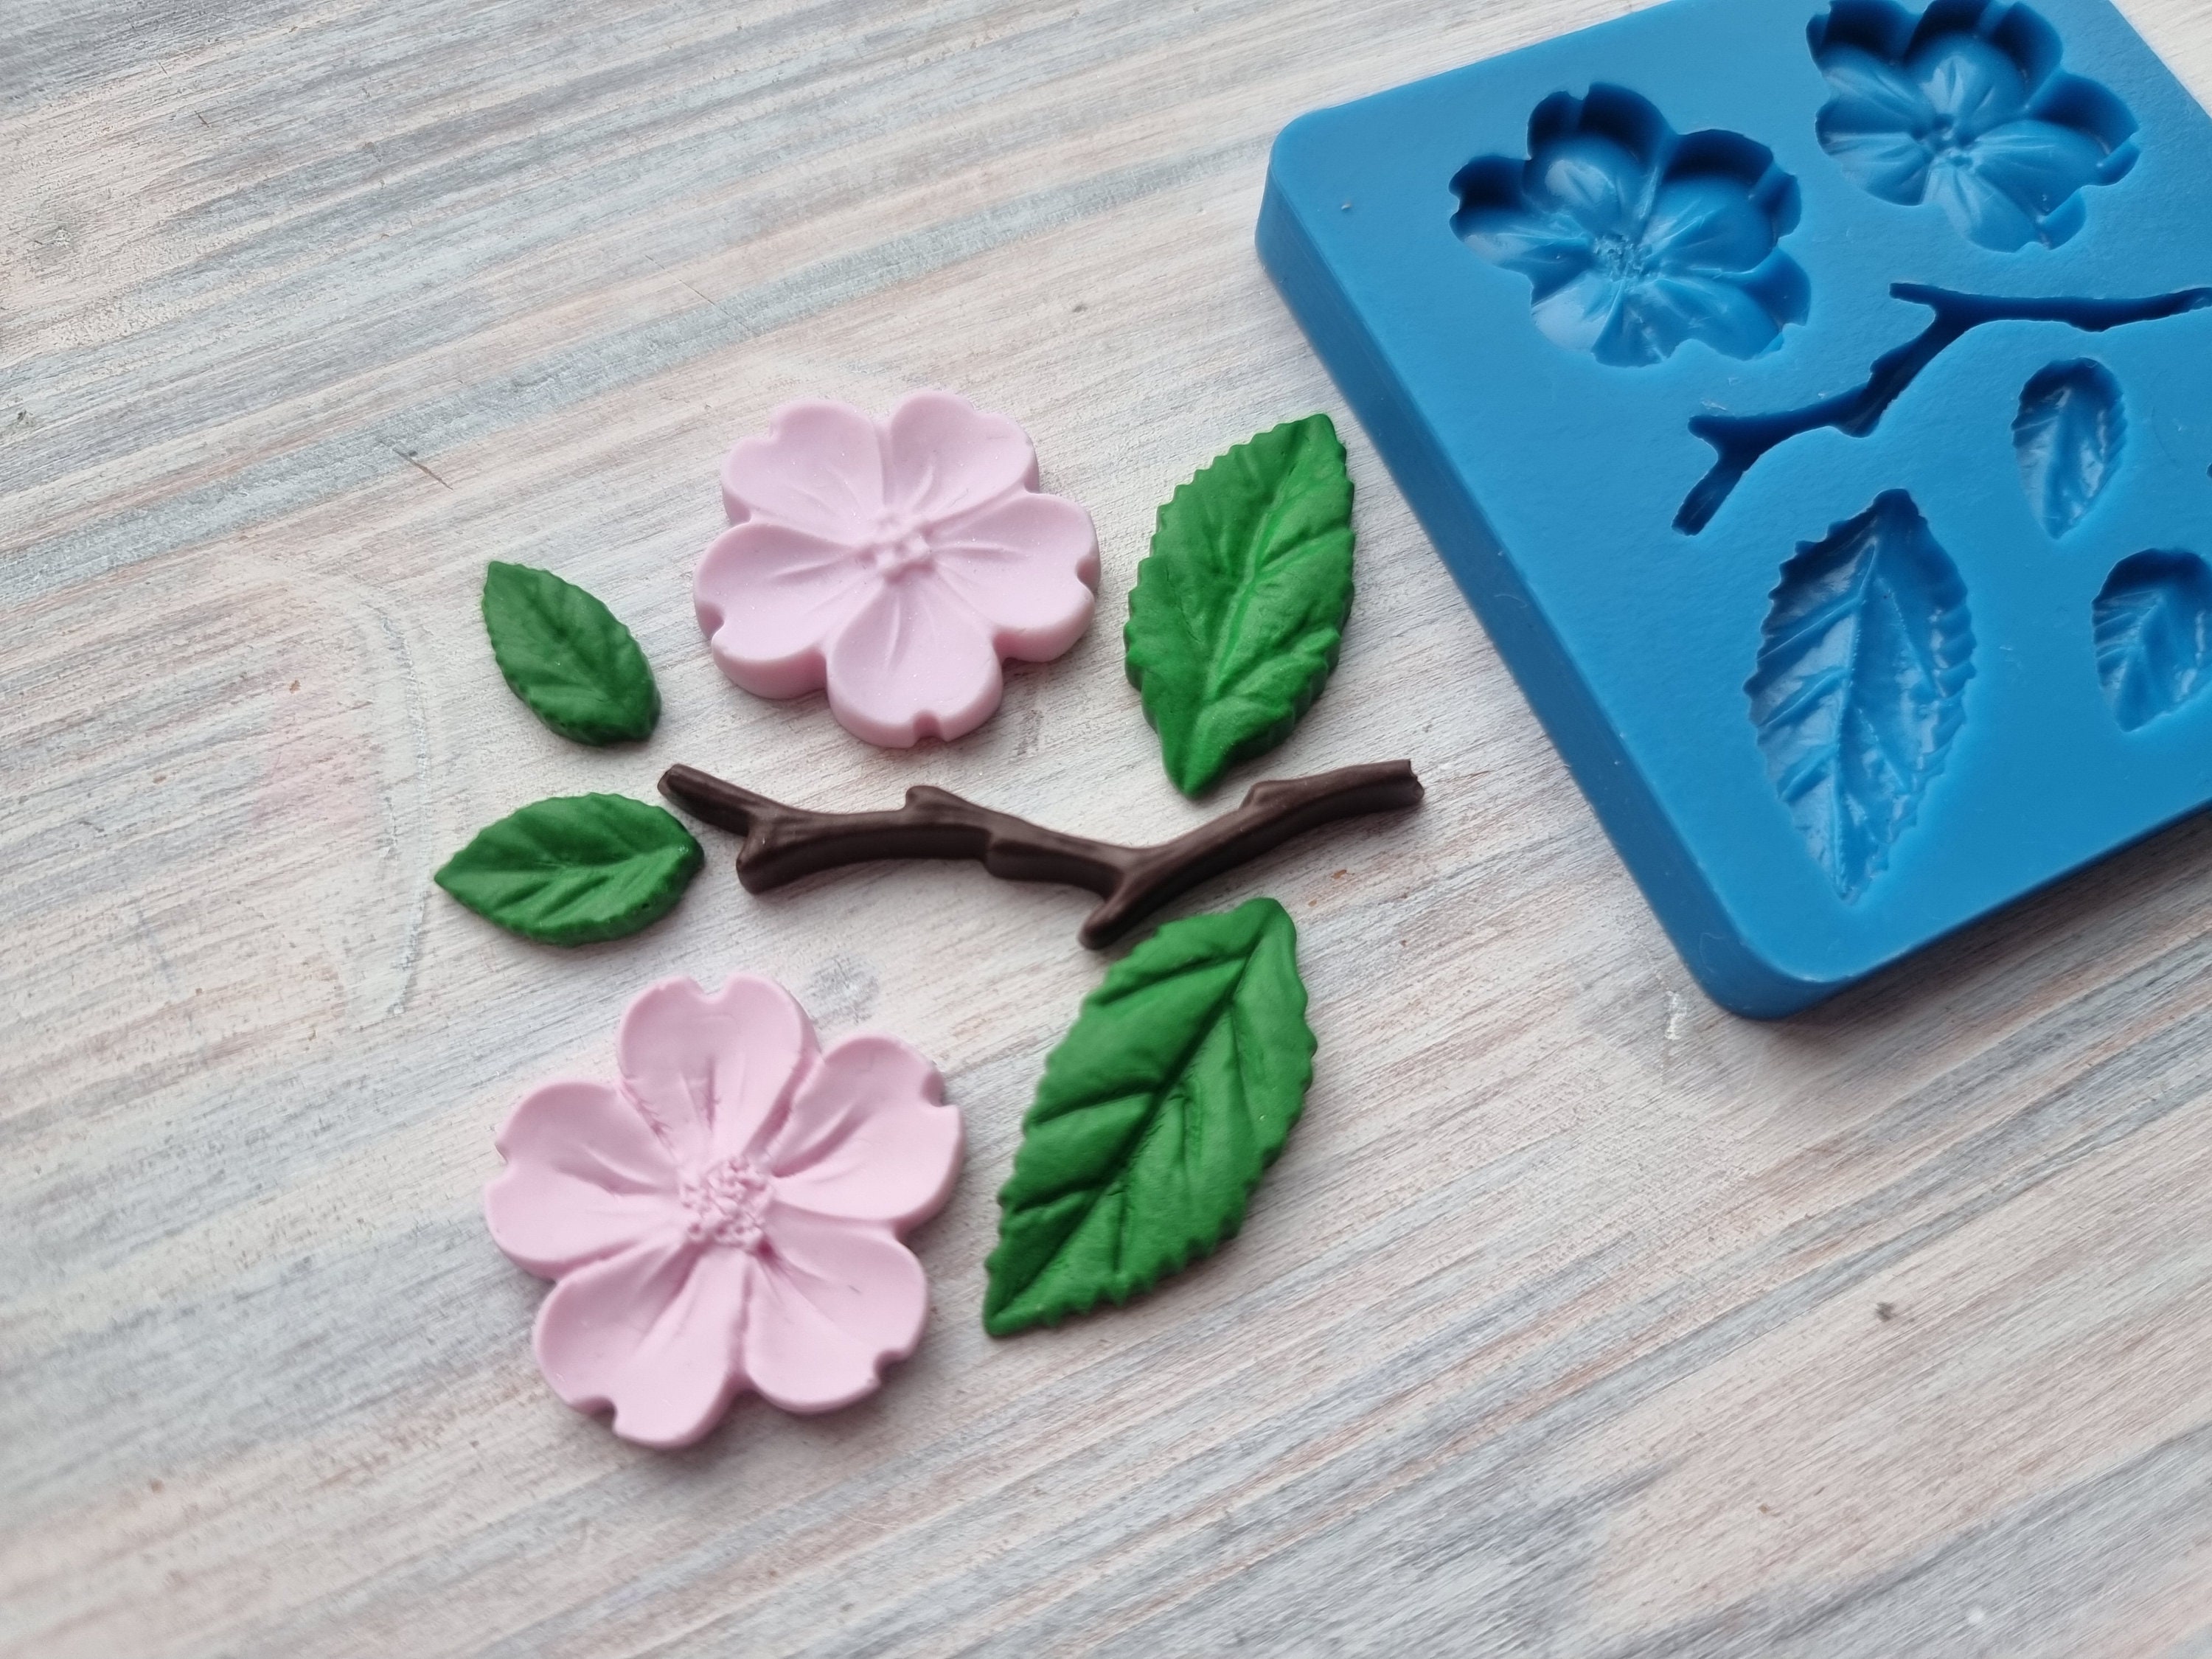 Irises Flower Silicone Soap Molds for Soap Making made of High Quality  Silicone. -  Israel